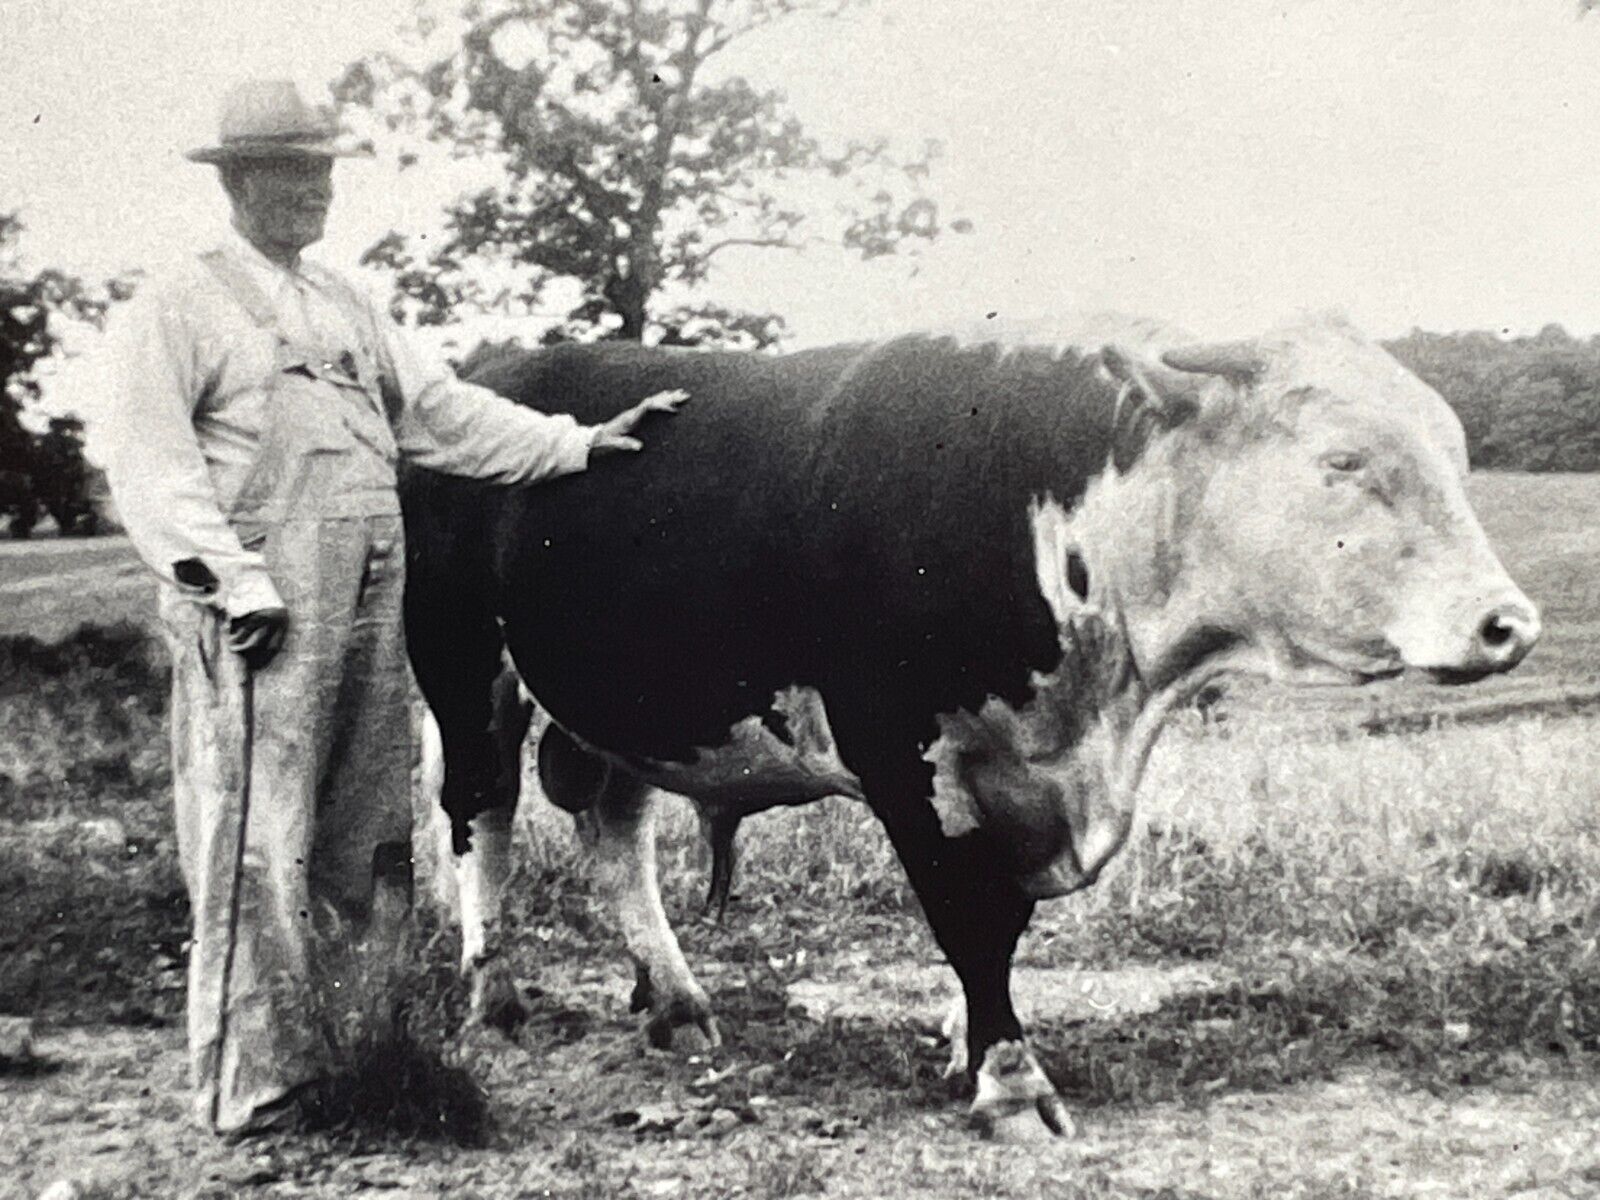 XD Photograph Old Fat Farmer With Cane Pets Large Cow Heifer Overalls 1940-50s